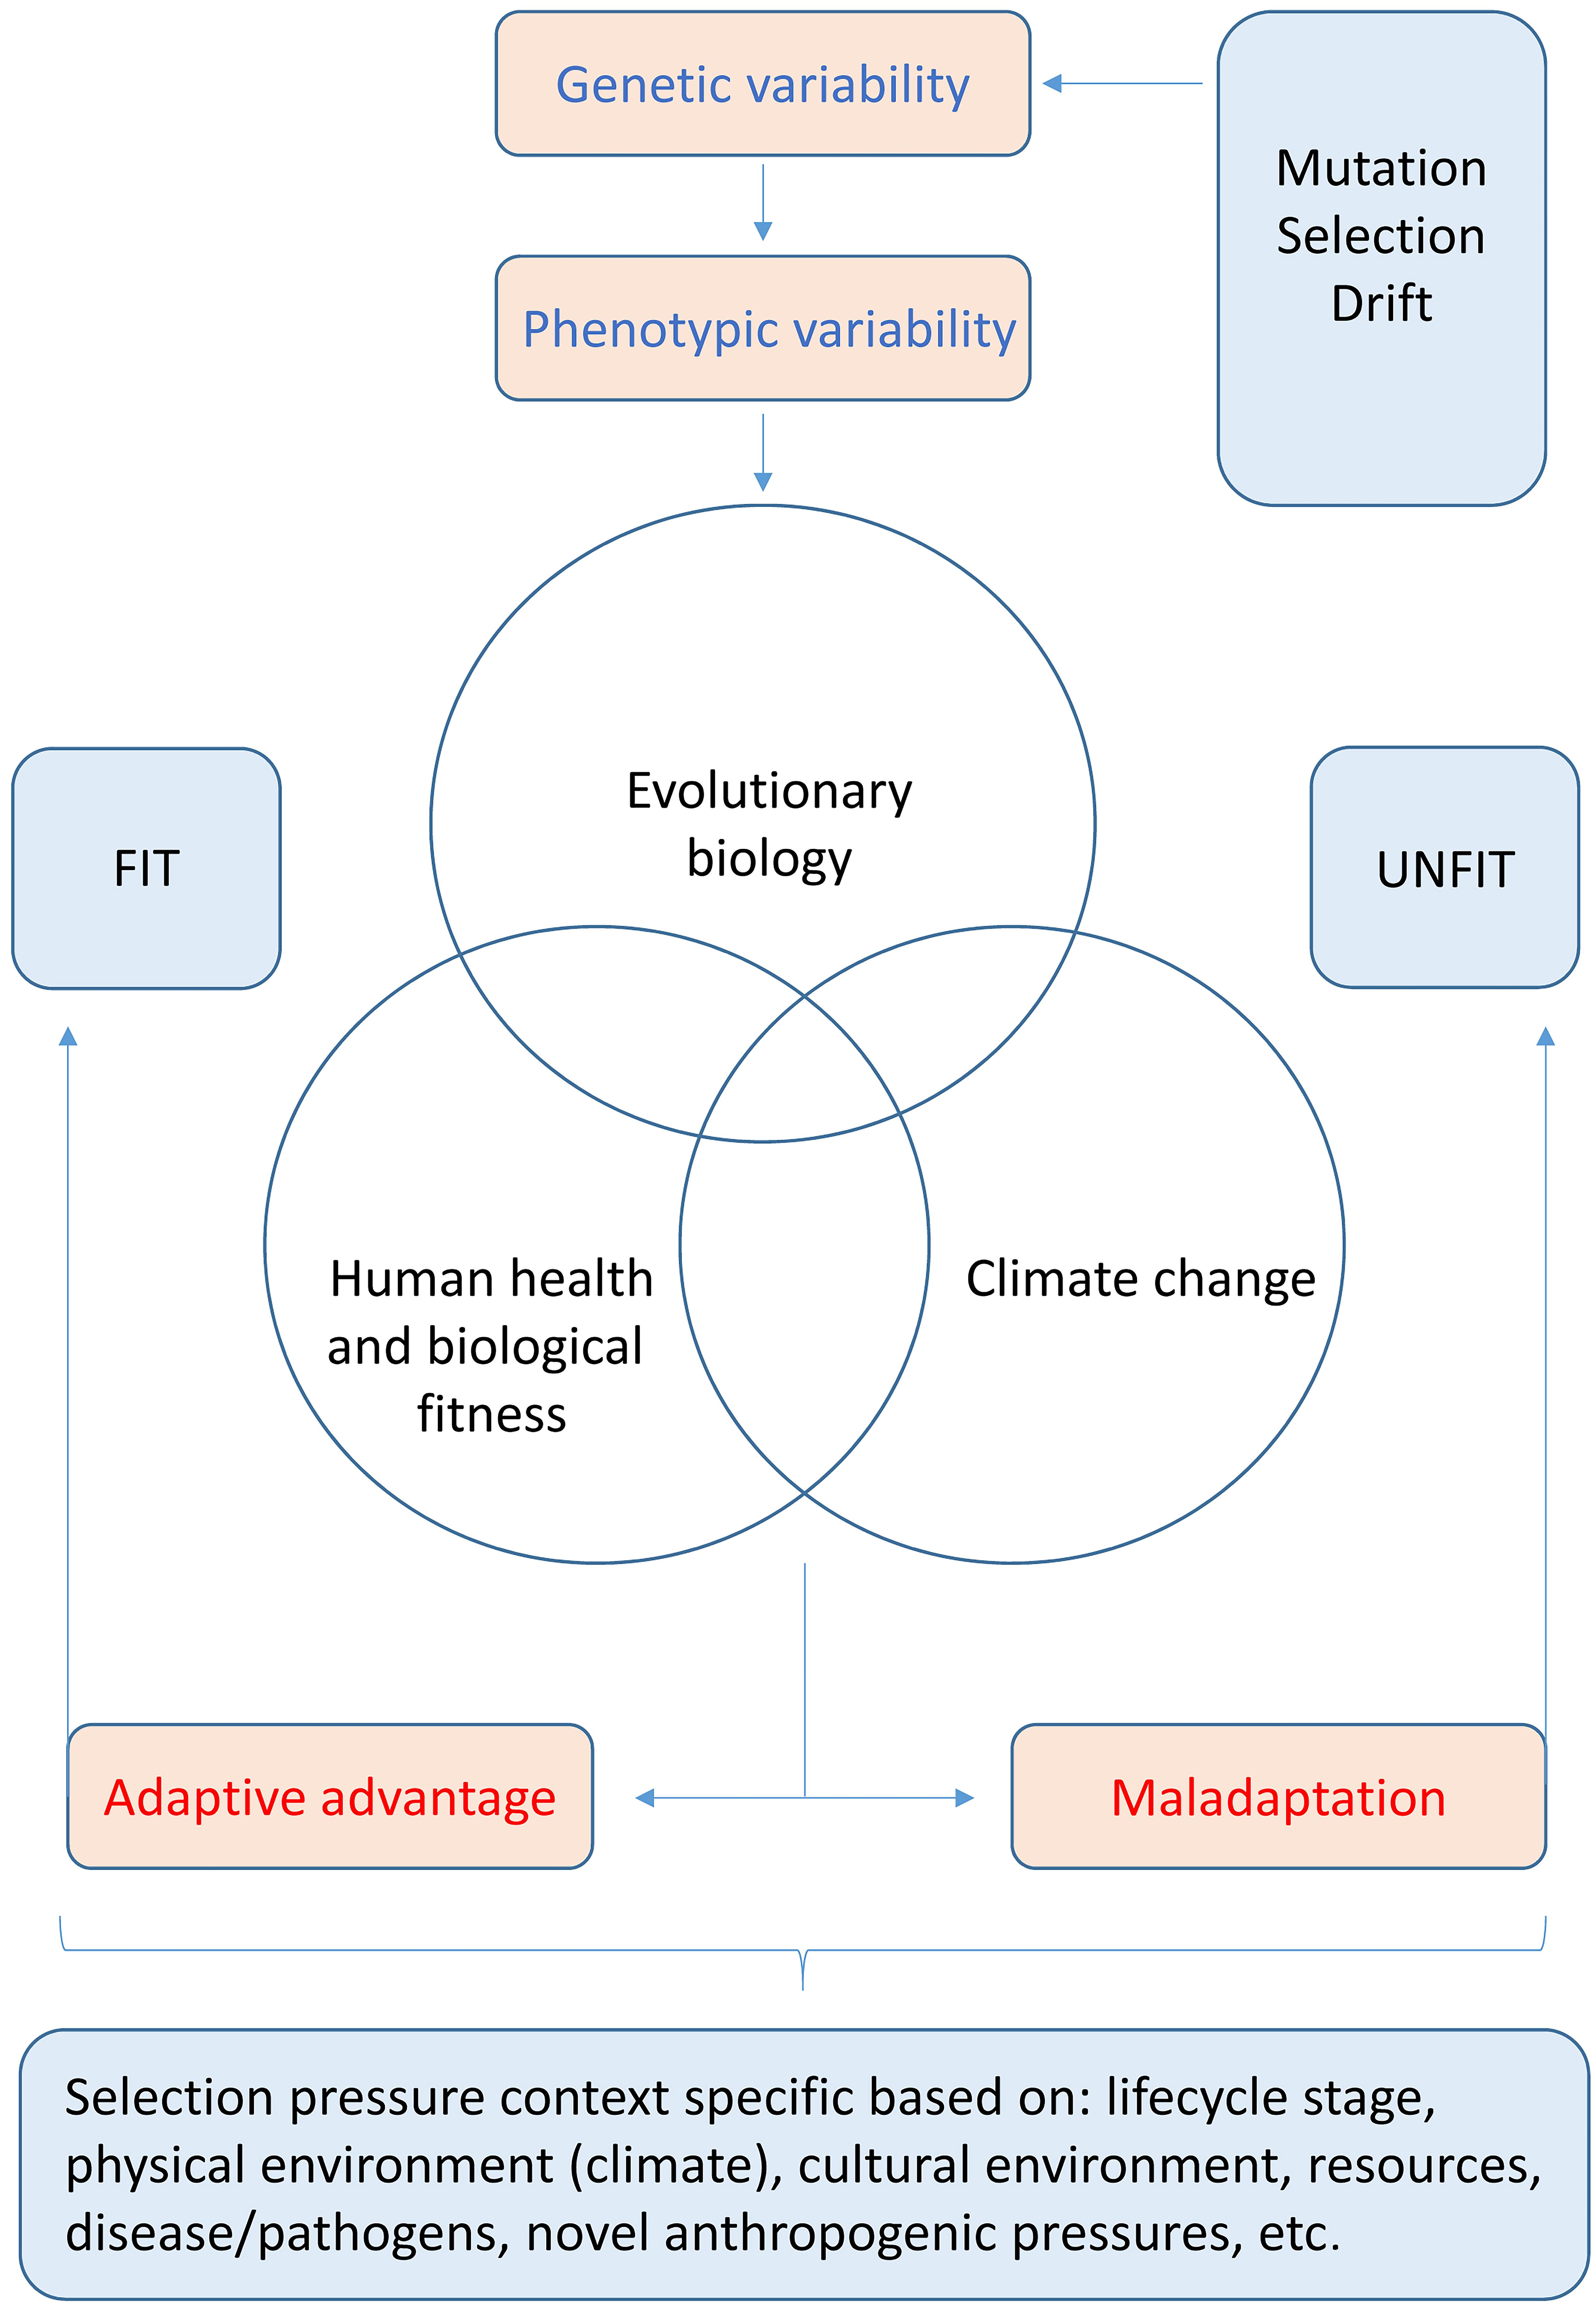 The simplified schematic shows some of the key aspects of evolutionary biology that shape the human phenome and permit the Darwinian medicine approach to the understanding and maintenance of human health (fitness).